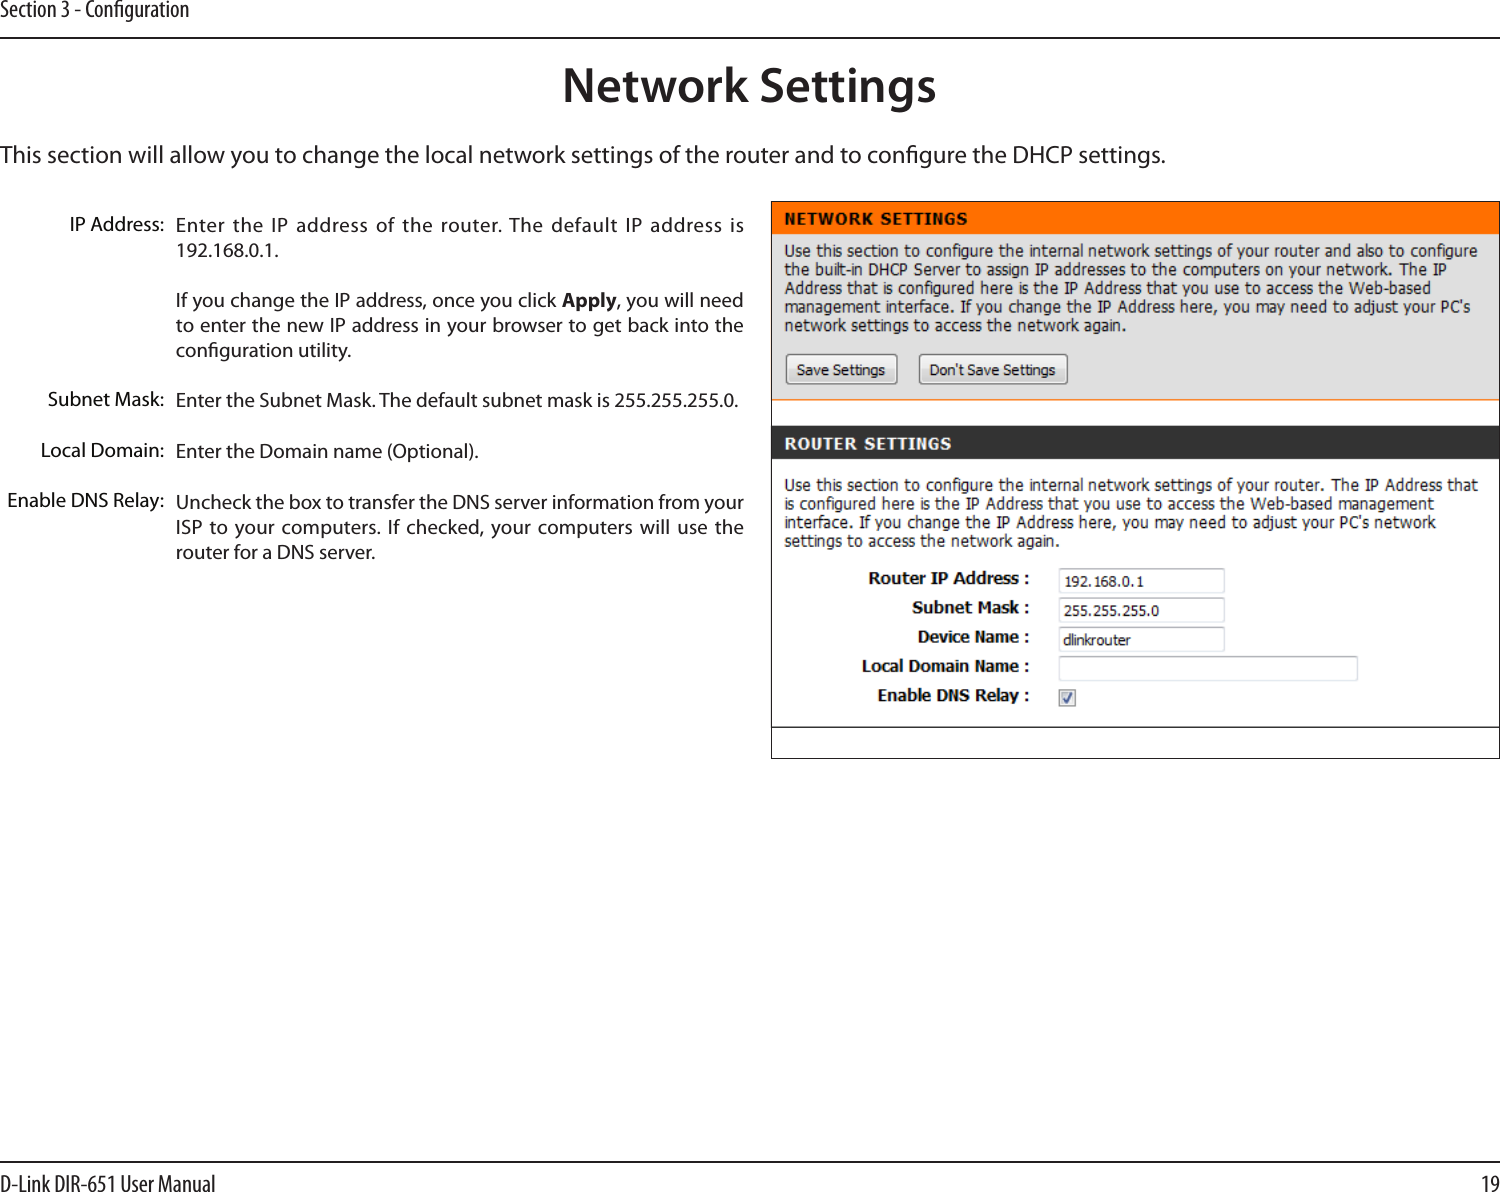 19D-Link DIR-651 User ManualSection 3 - CongurationThis section will allow you to change the local network settings of the router and to congure the DHCP settings.Network SettingsEnter the IP address  of the router. The default IP  address is 192.168.0.1.If you change the IP address, once you click Apply, you will need to enter the new IP address in your browser to get back into the conguration utility.Enter the Subnet Mask. The default subnet mask is 255.255.255.0.Enter the Domain name (Optional).Uncheck the box to transfer the DNS server information from your ISP to  your computers. If  checked, your computers will  use the router for a DNS server.IP Address:Subnet Mask:Local Domain:Enable DNS Relay: